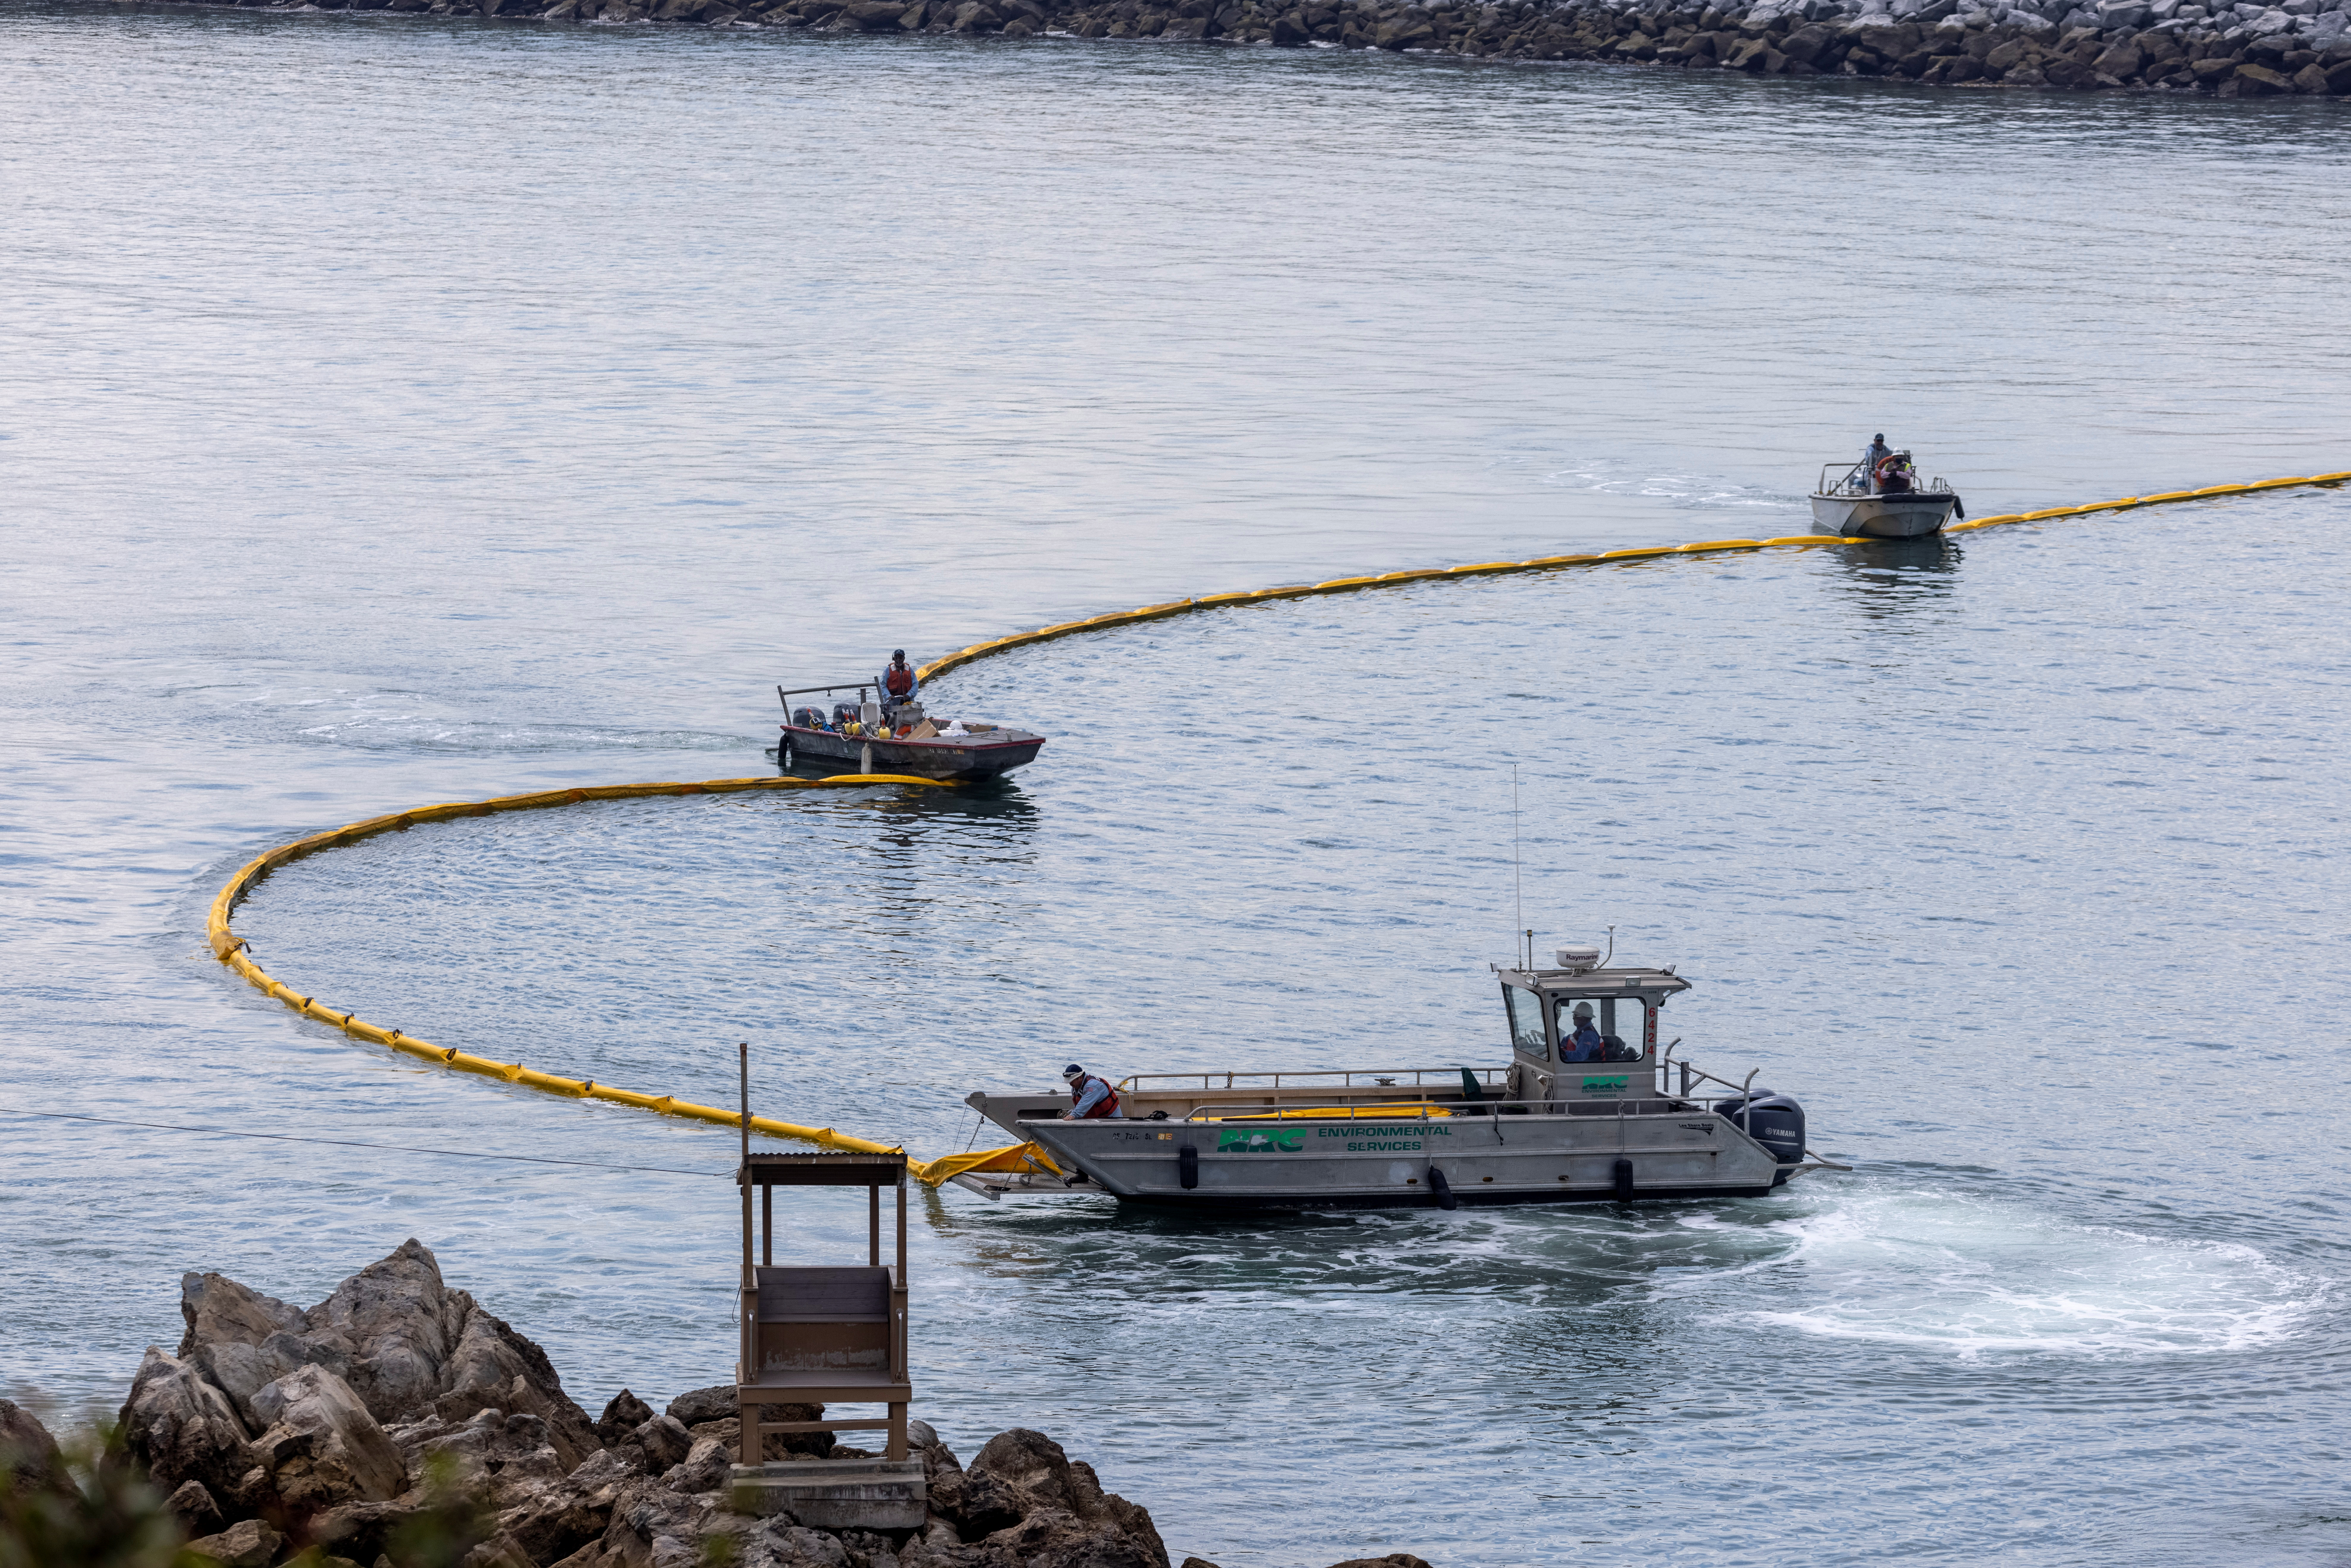 Workers seal off Newport Beach harbor as a major California oil spill moves south down the coast